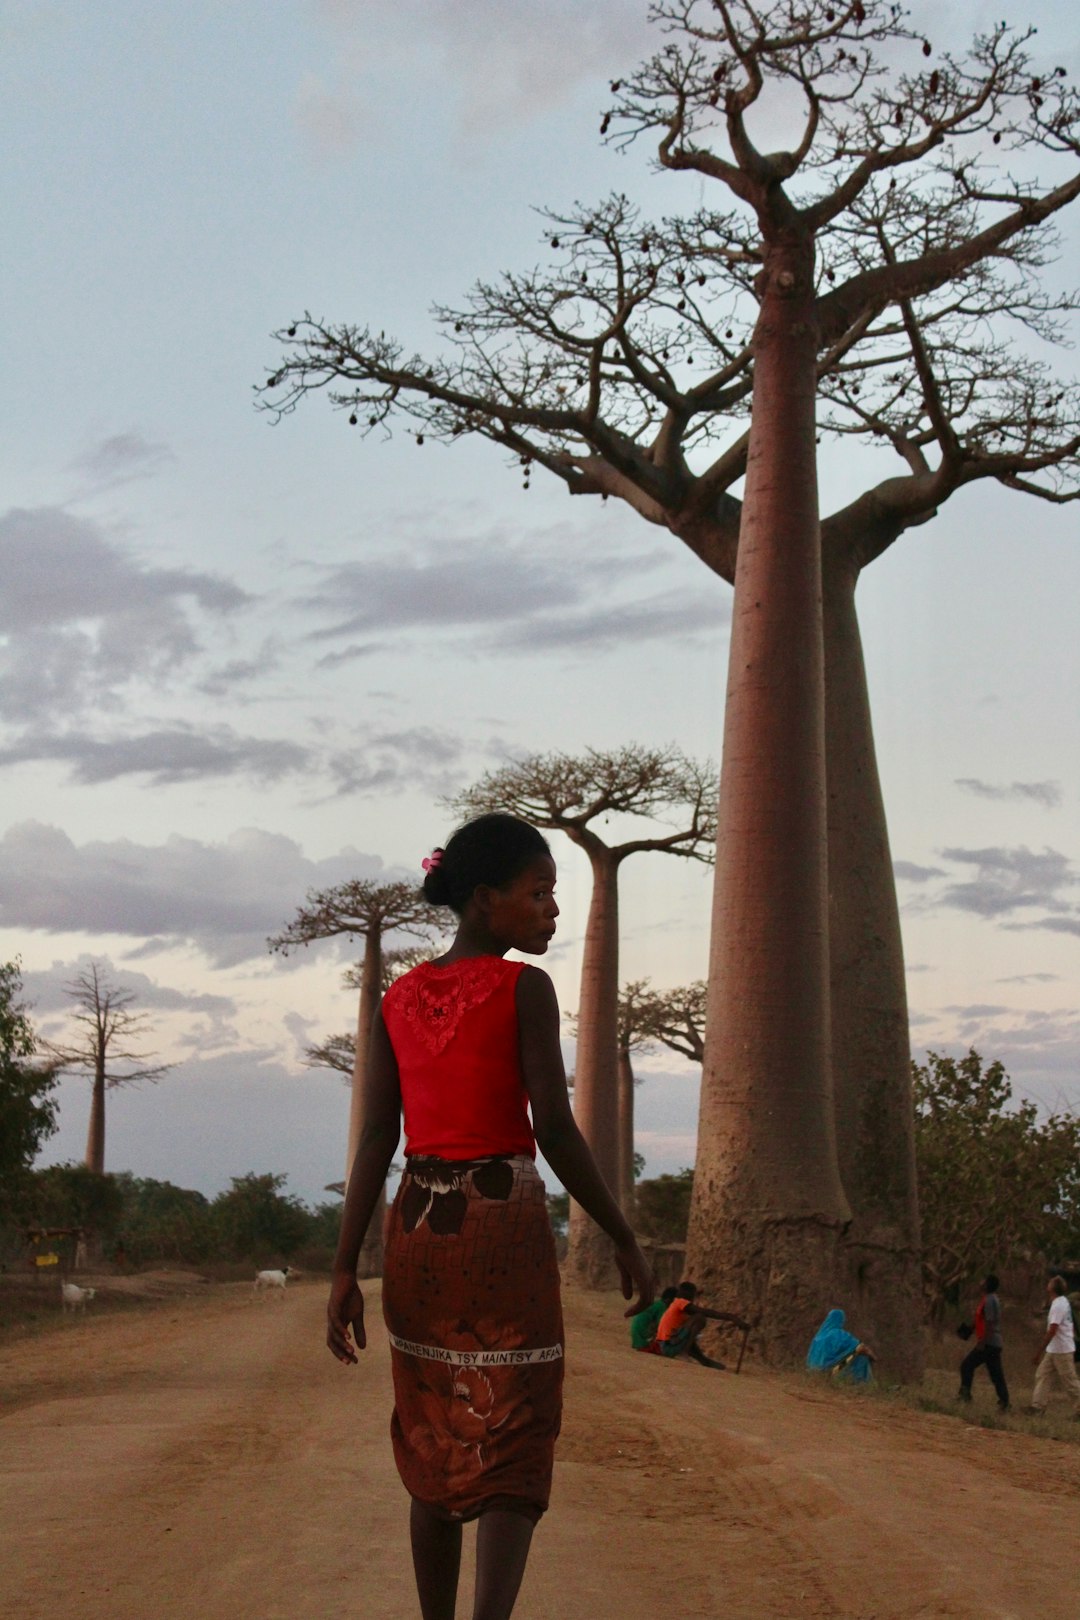 Travel Tips and Stories of Avenue of the Baobabs in Madagascar